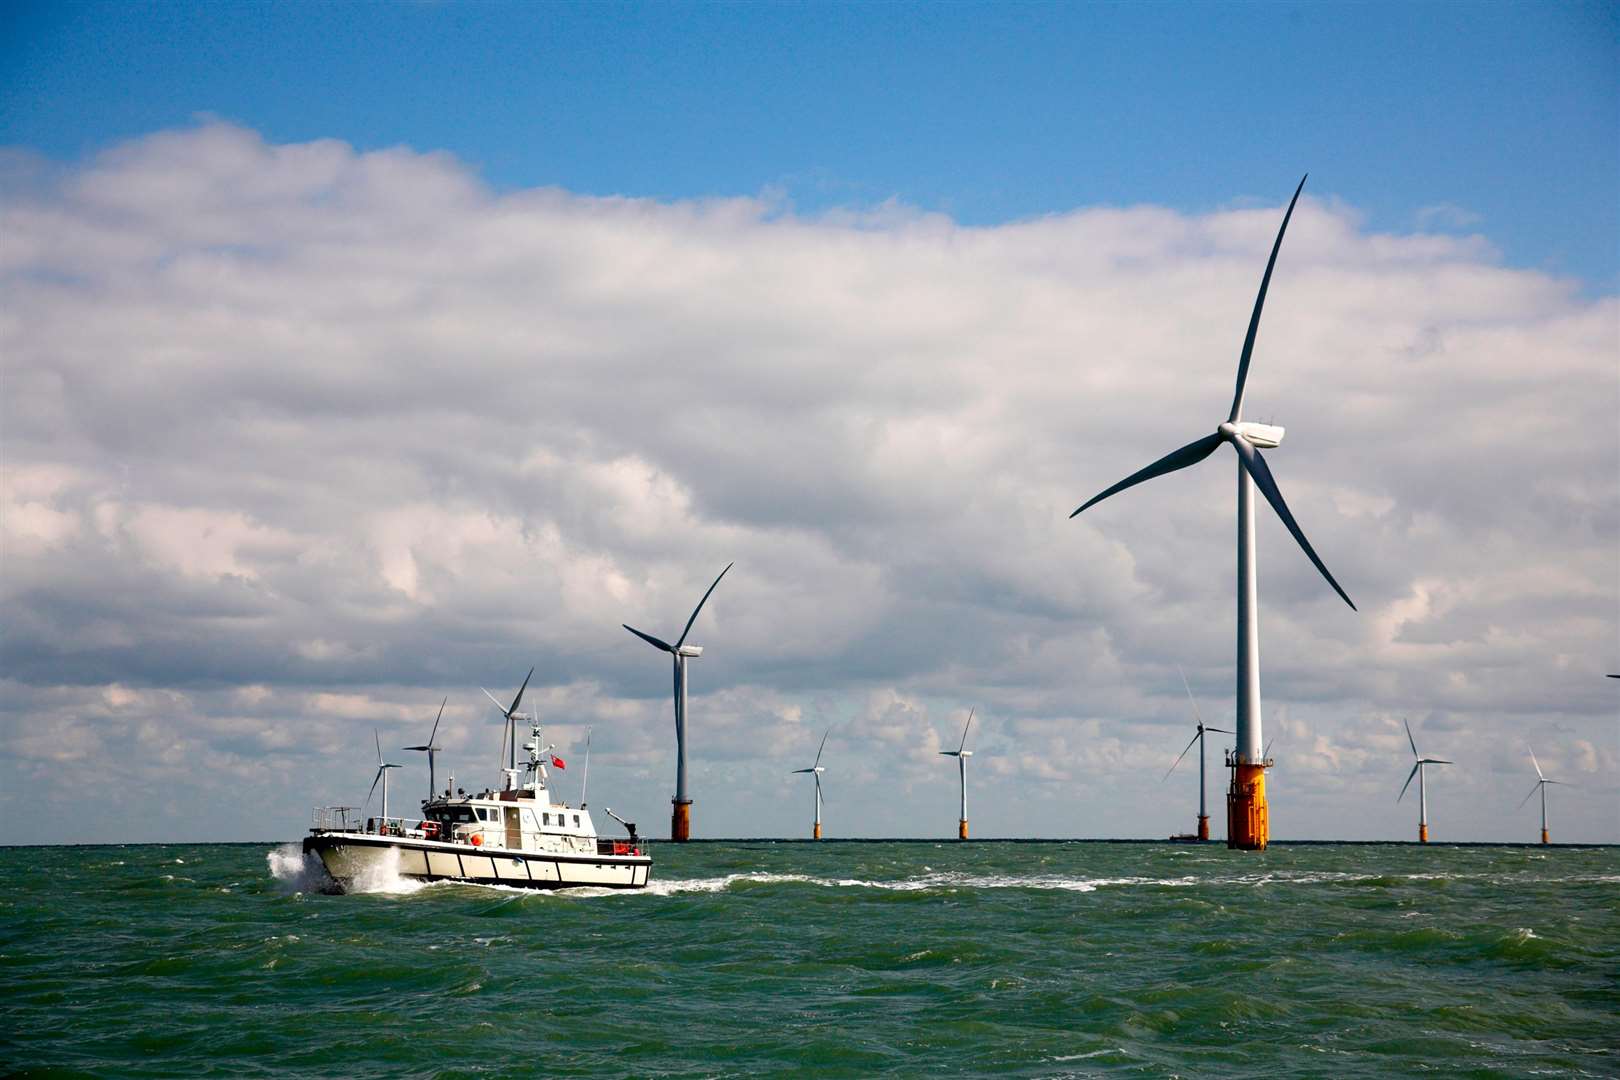 Thanet Offshore Wind Farm is around 12km off Foreness Point, near Margate